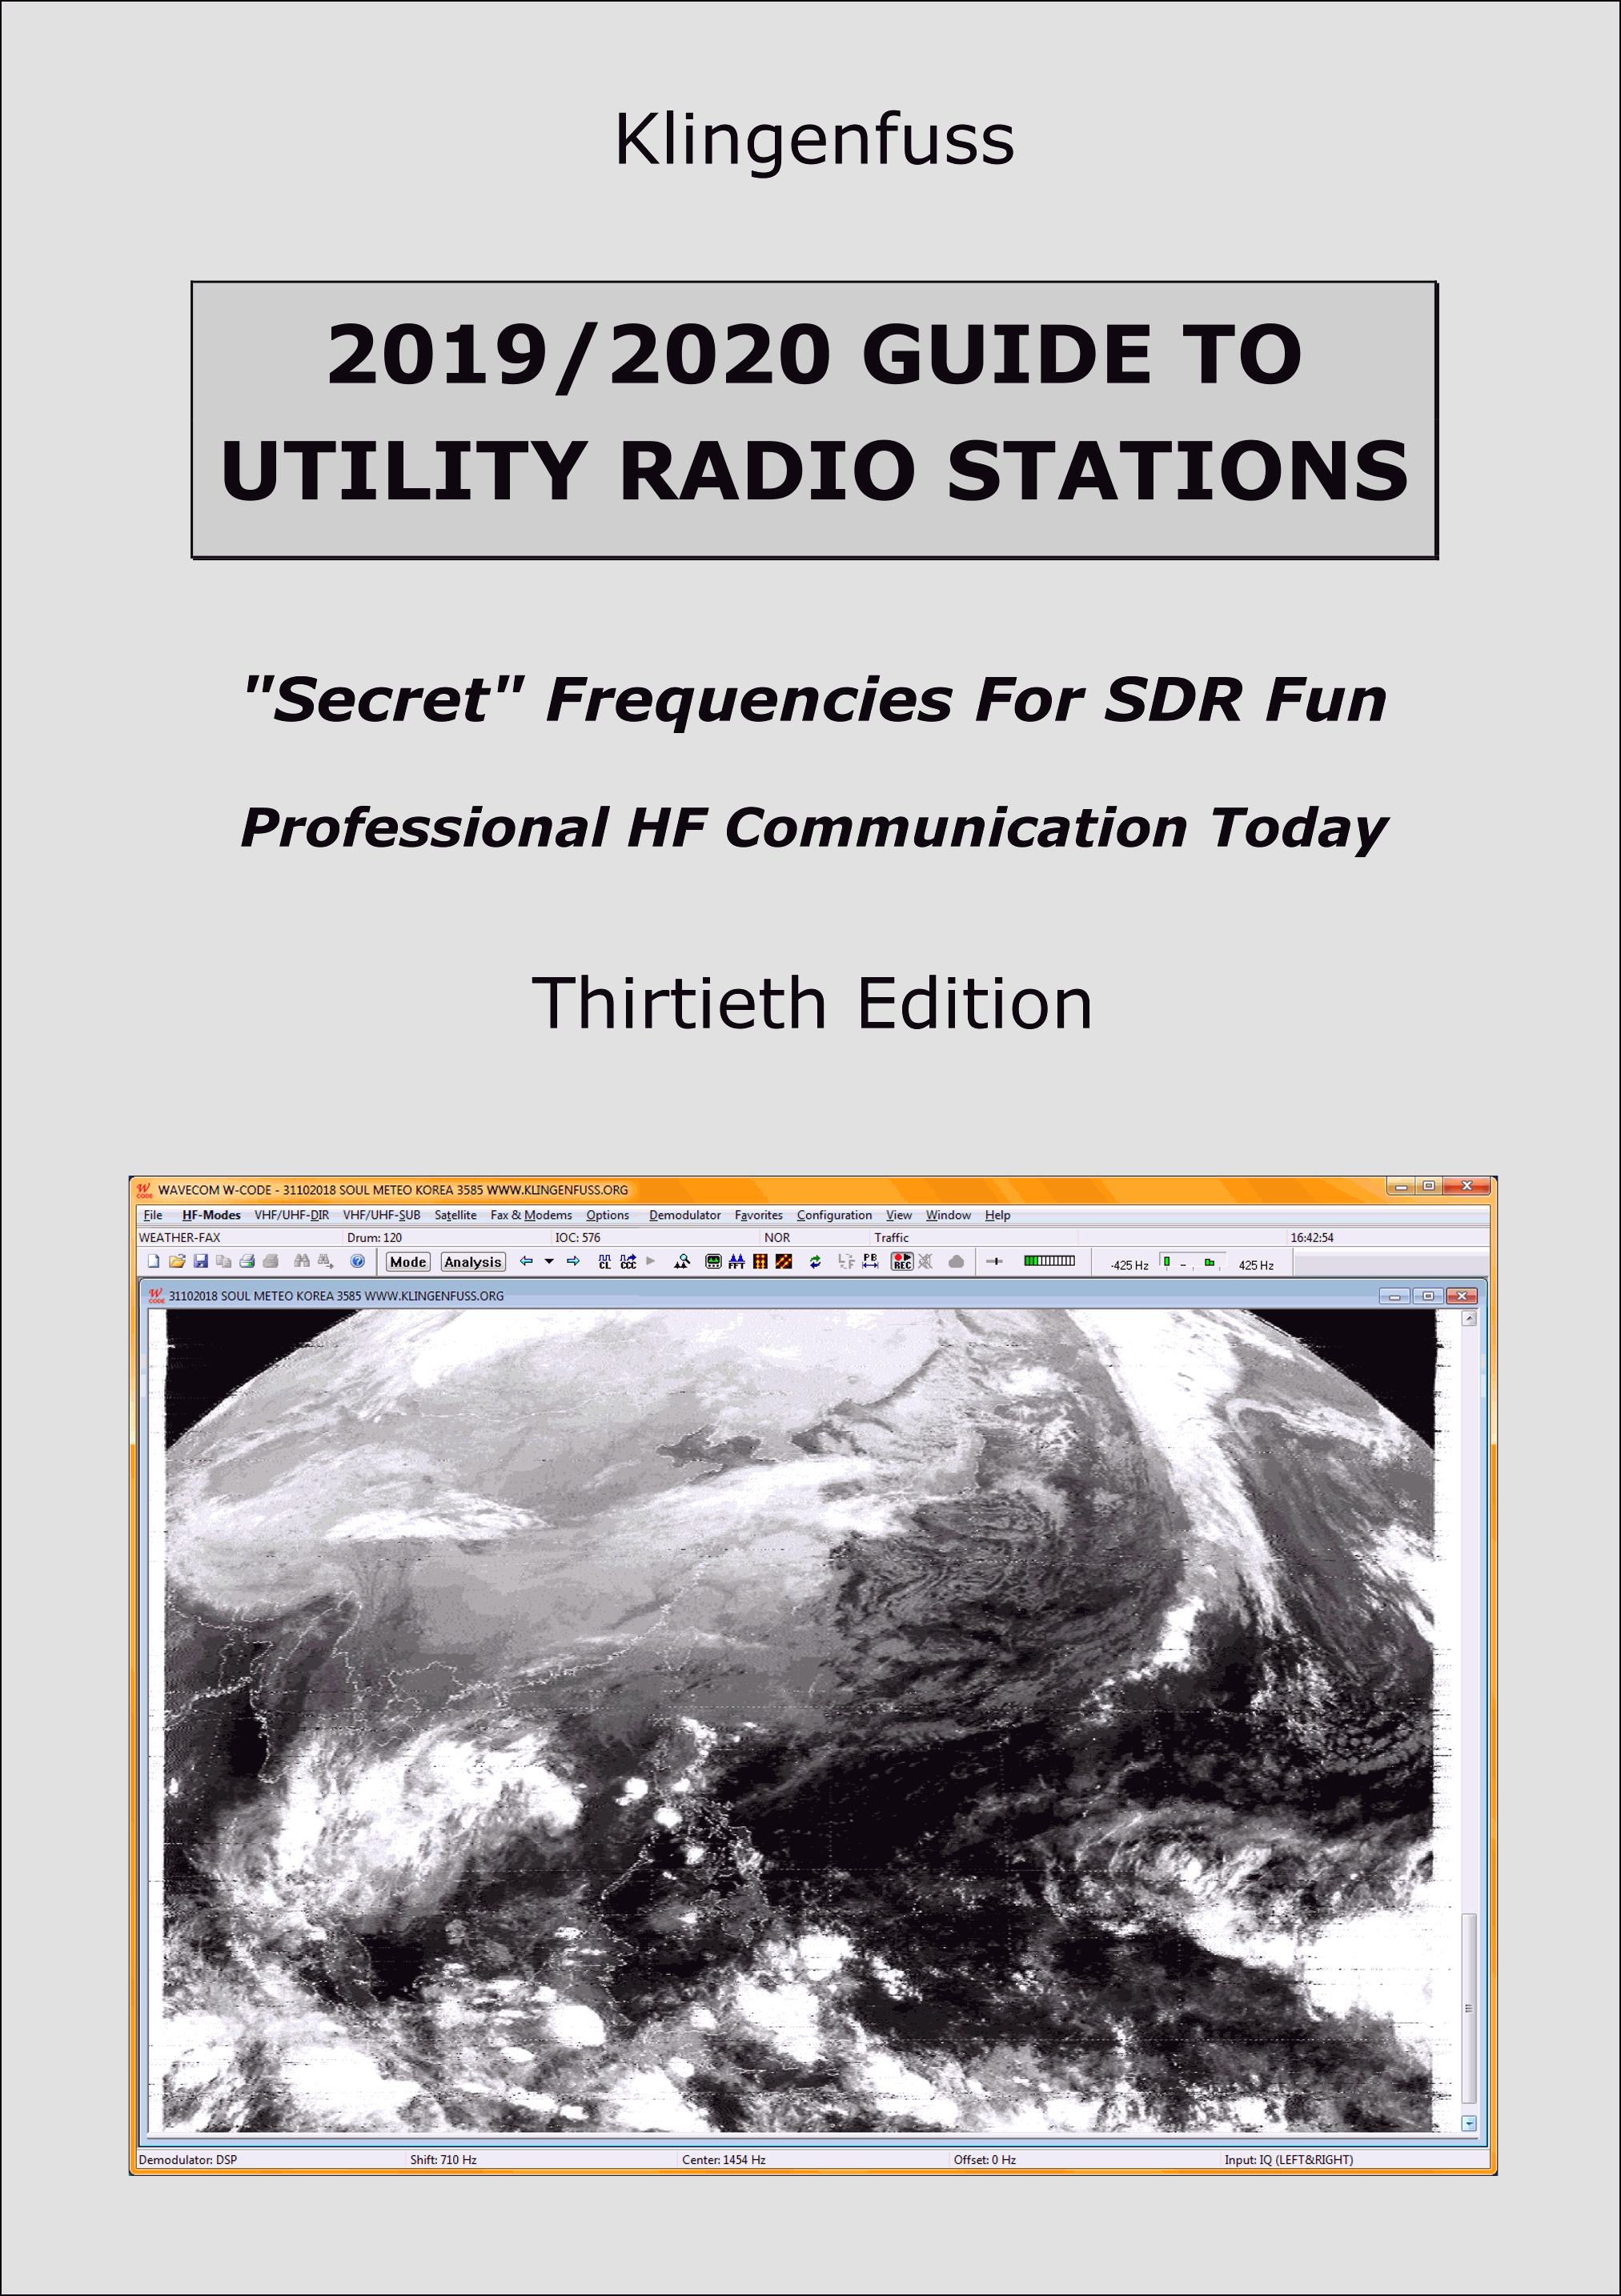 2019/2020 Guide to Utility Radio Stations